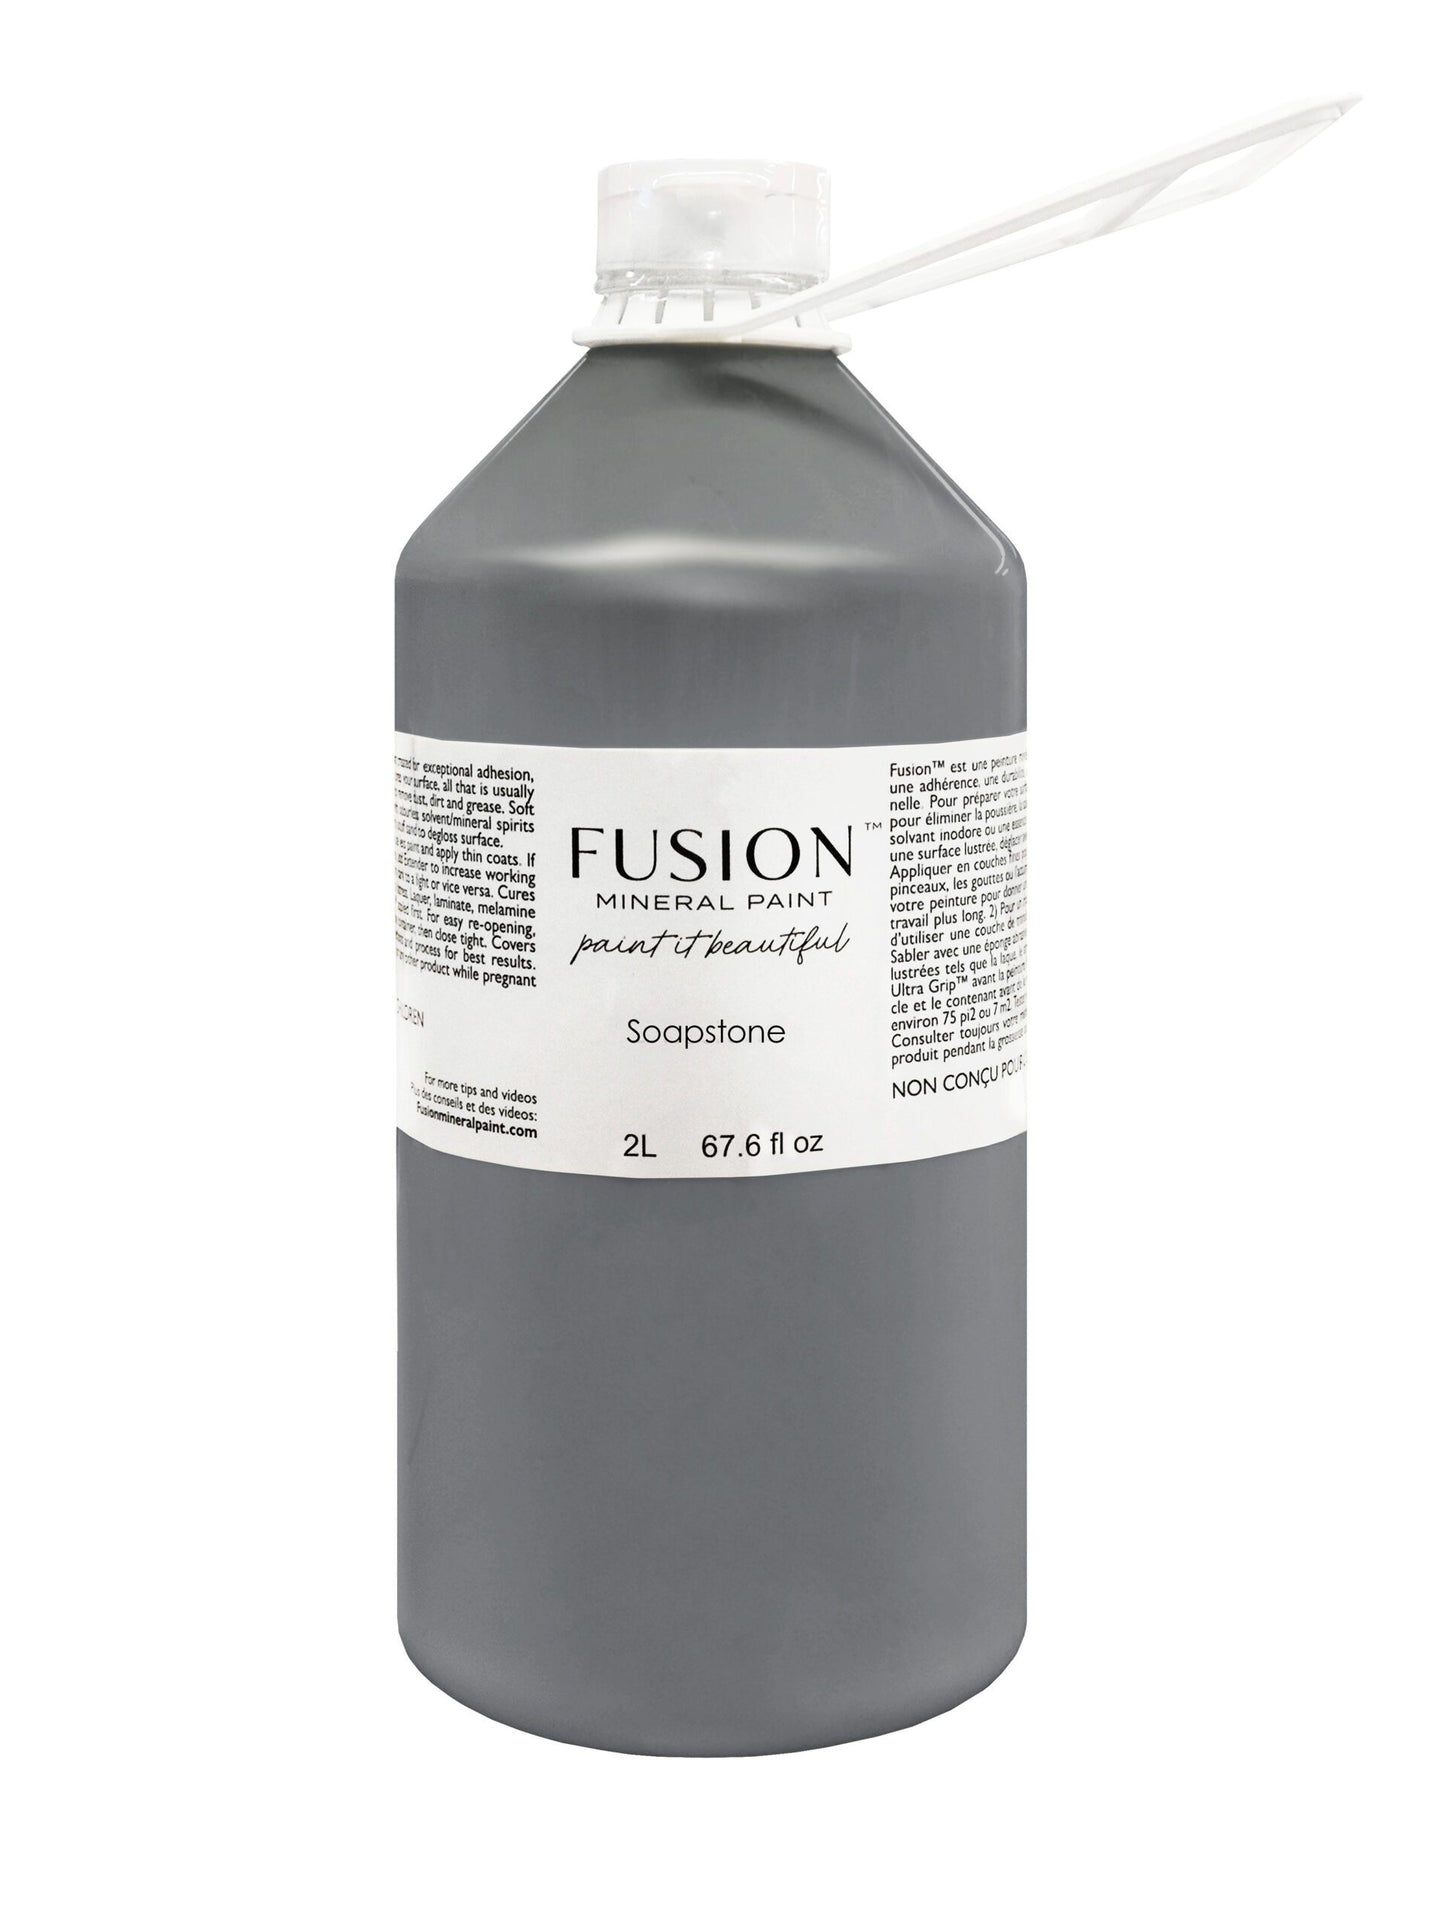 Fusion Mineral Paint SOAPSTONE